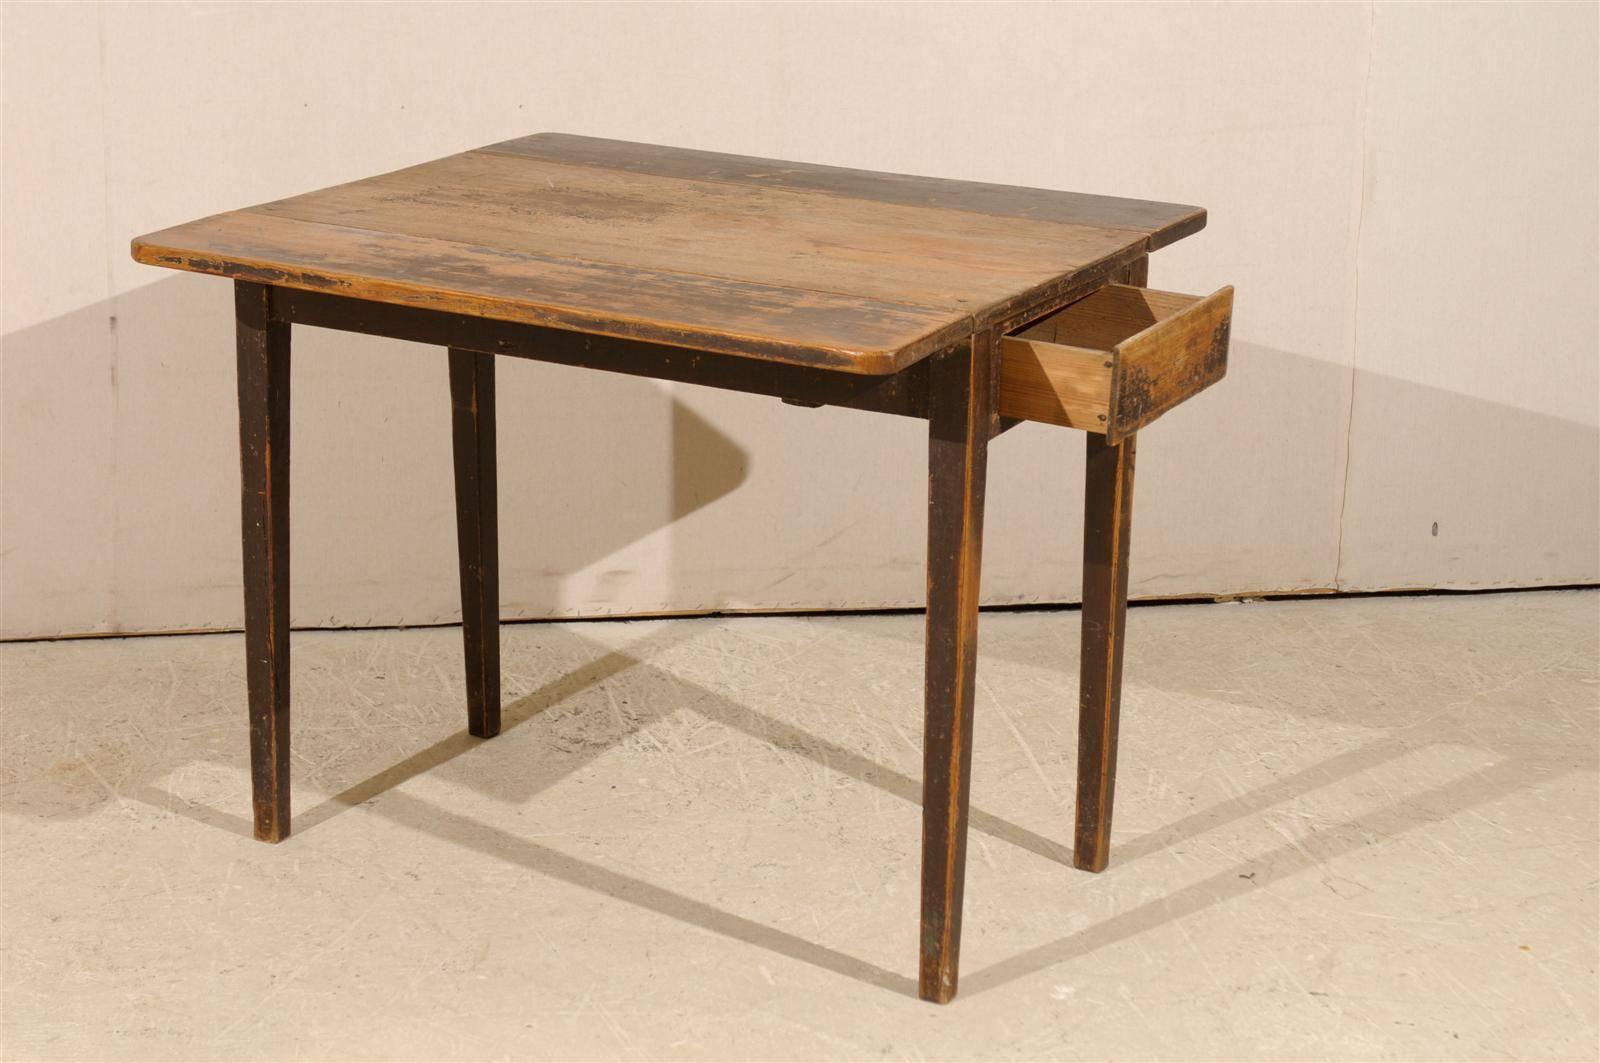 Wood Swedish Drop-Leaf Table with Single Drawer and Tapered Legs, 19th Century